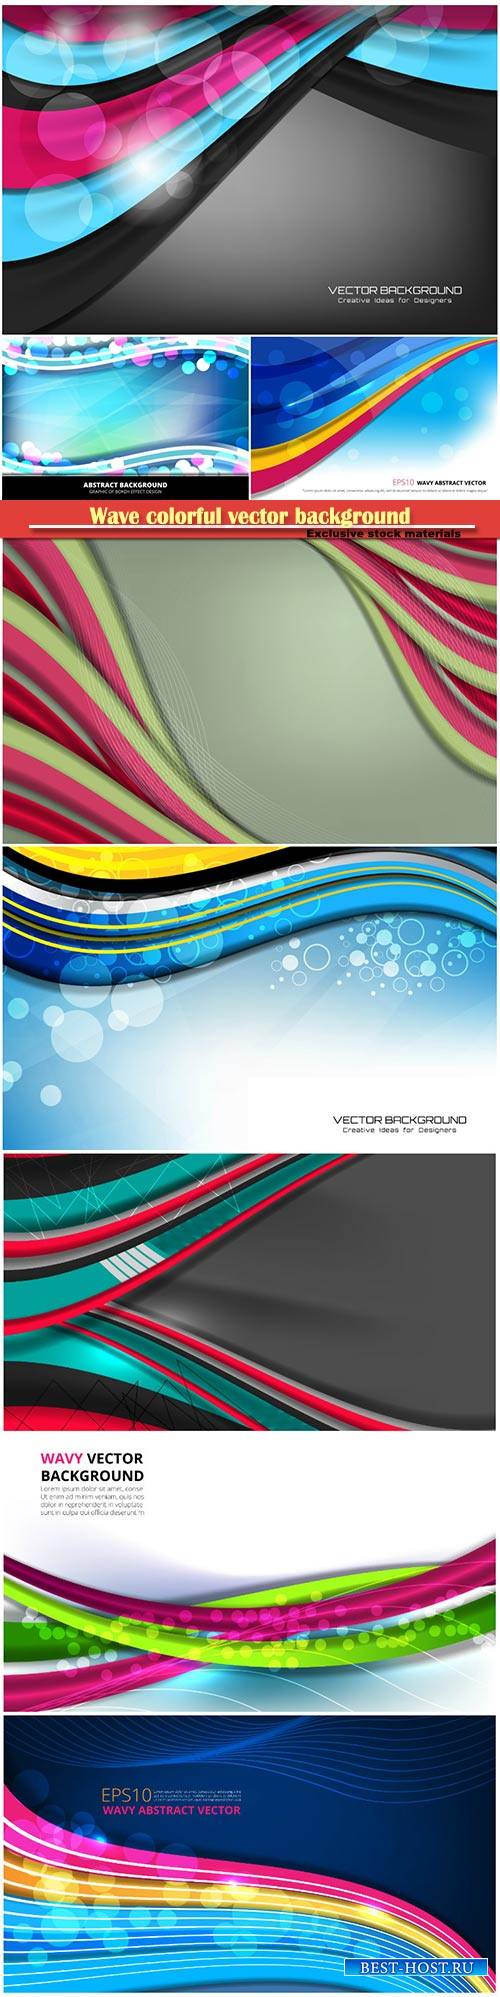 Wave colorful vector background